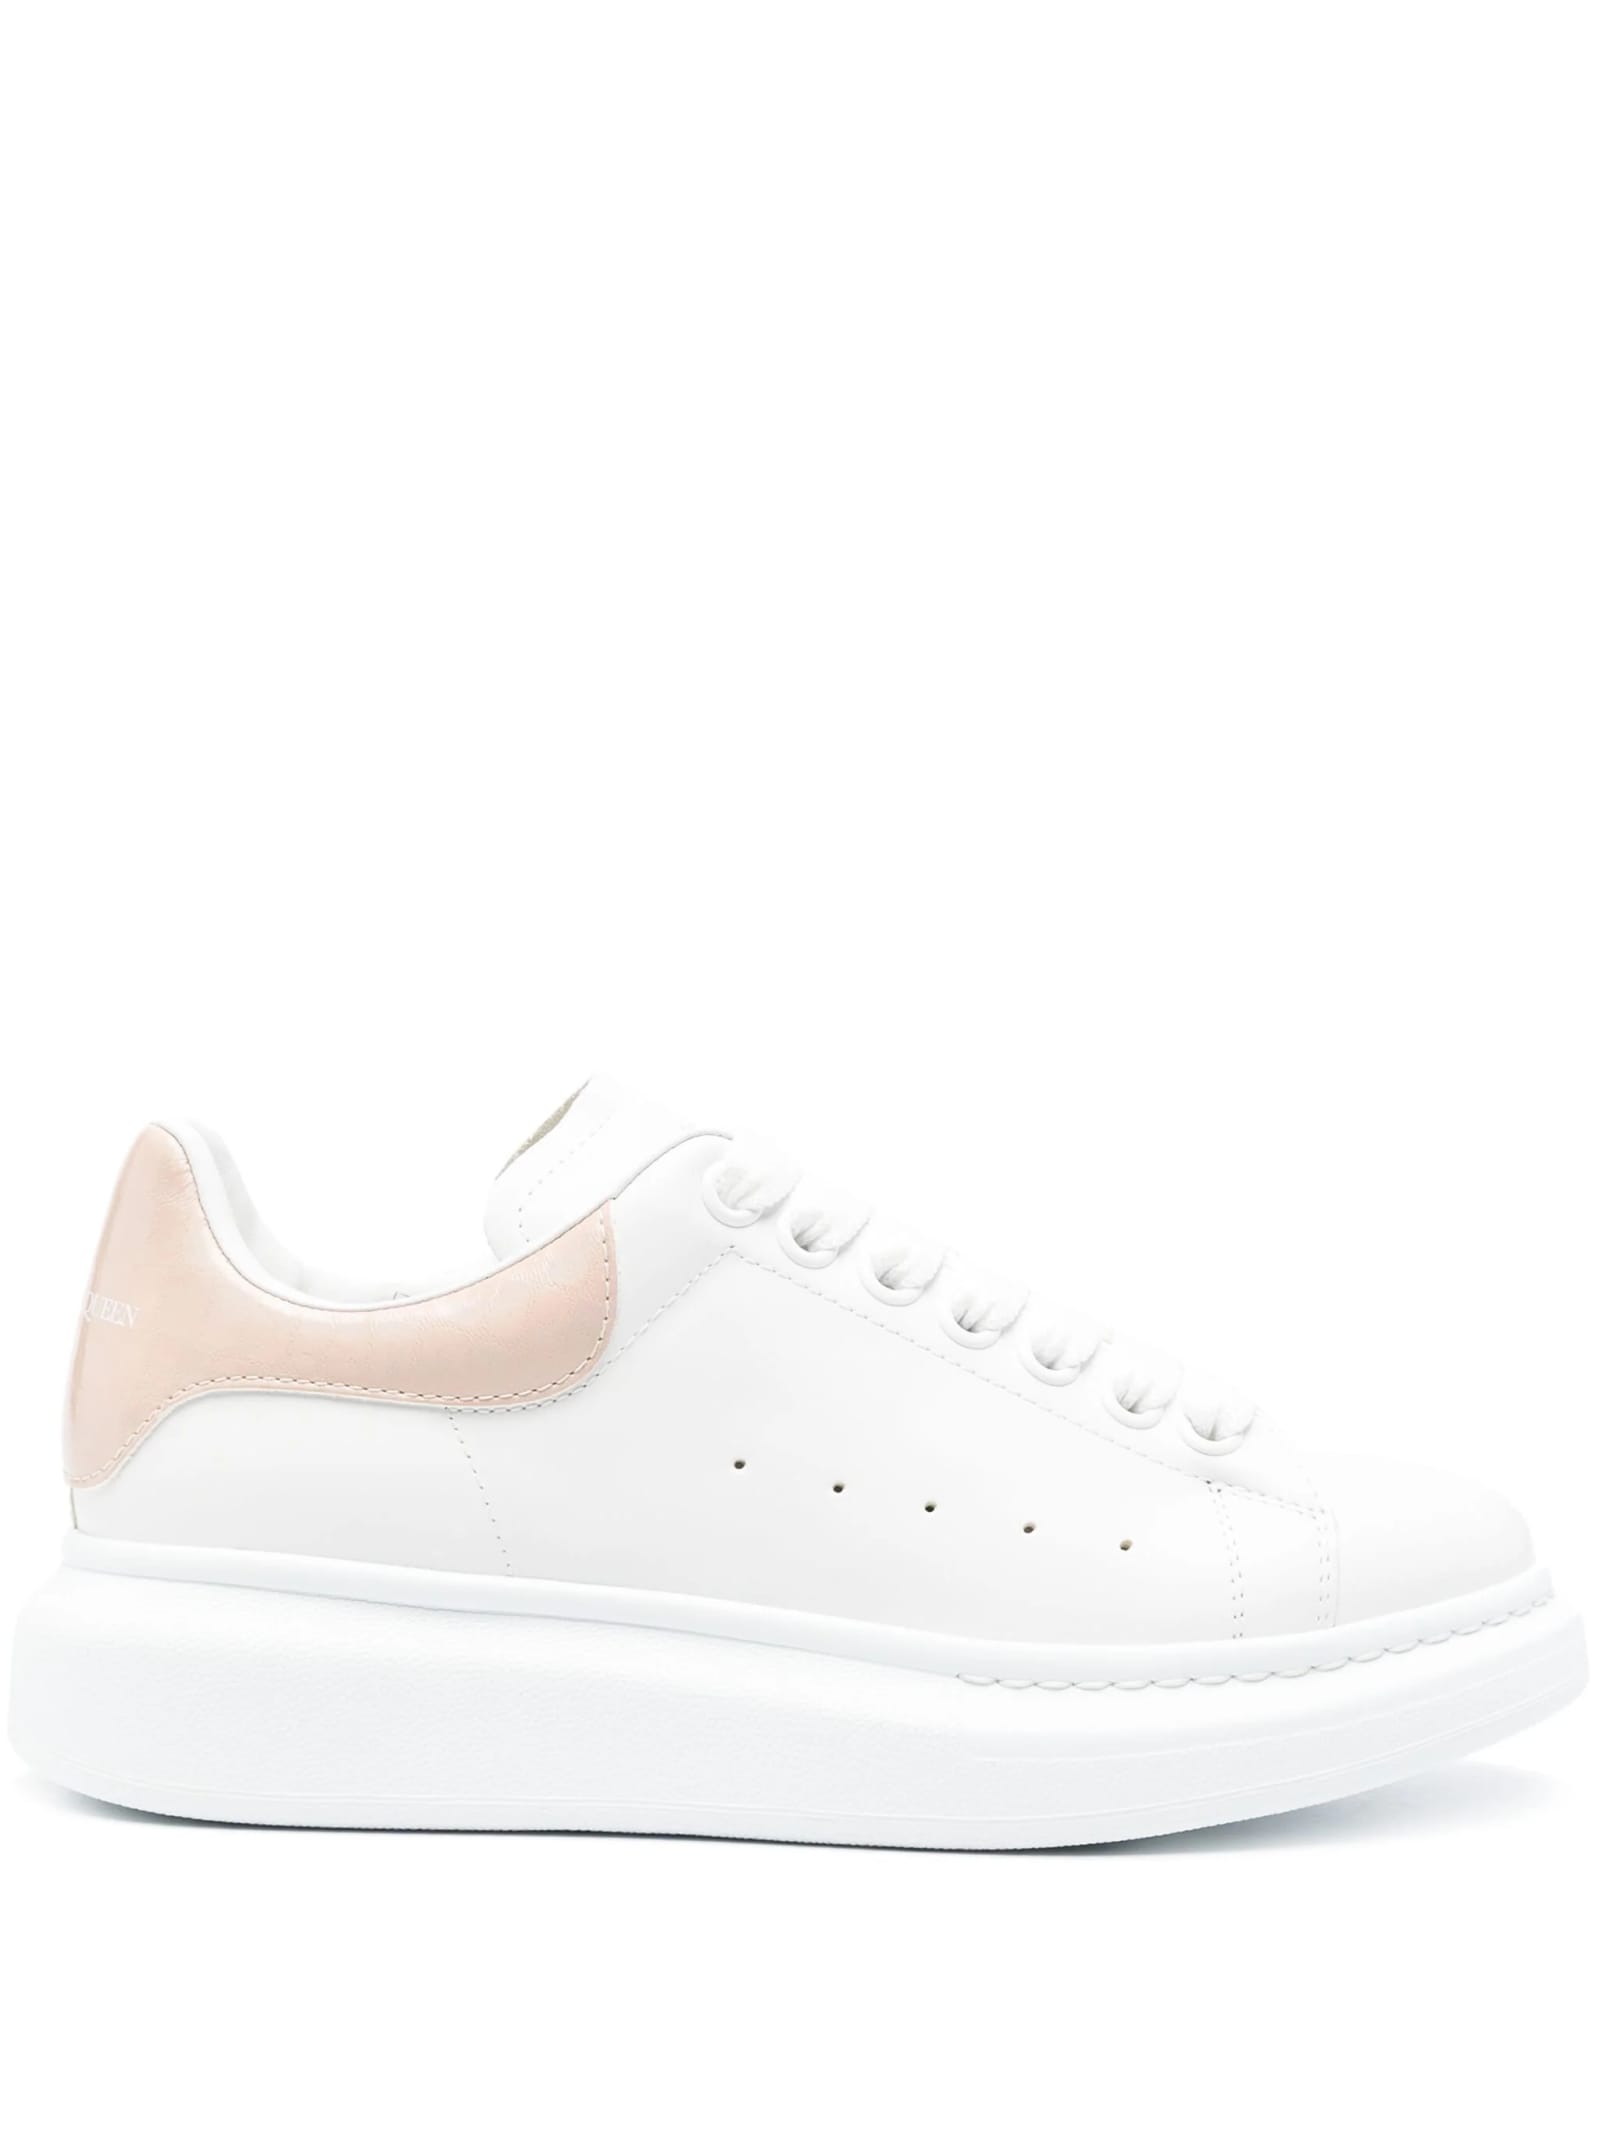 White Oversized Sneakers With Powder Beige Shiny Spoiler